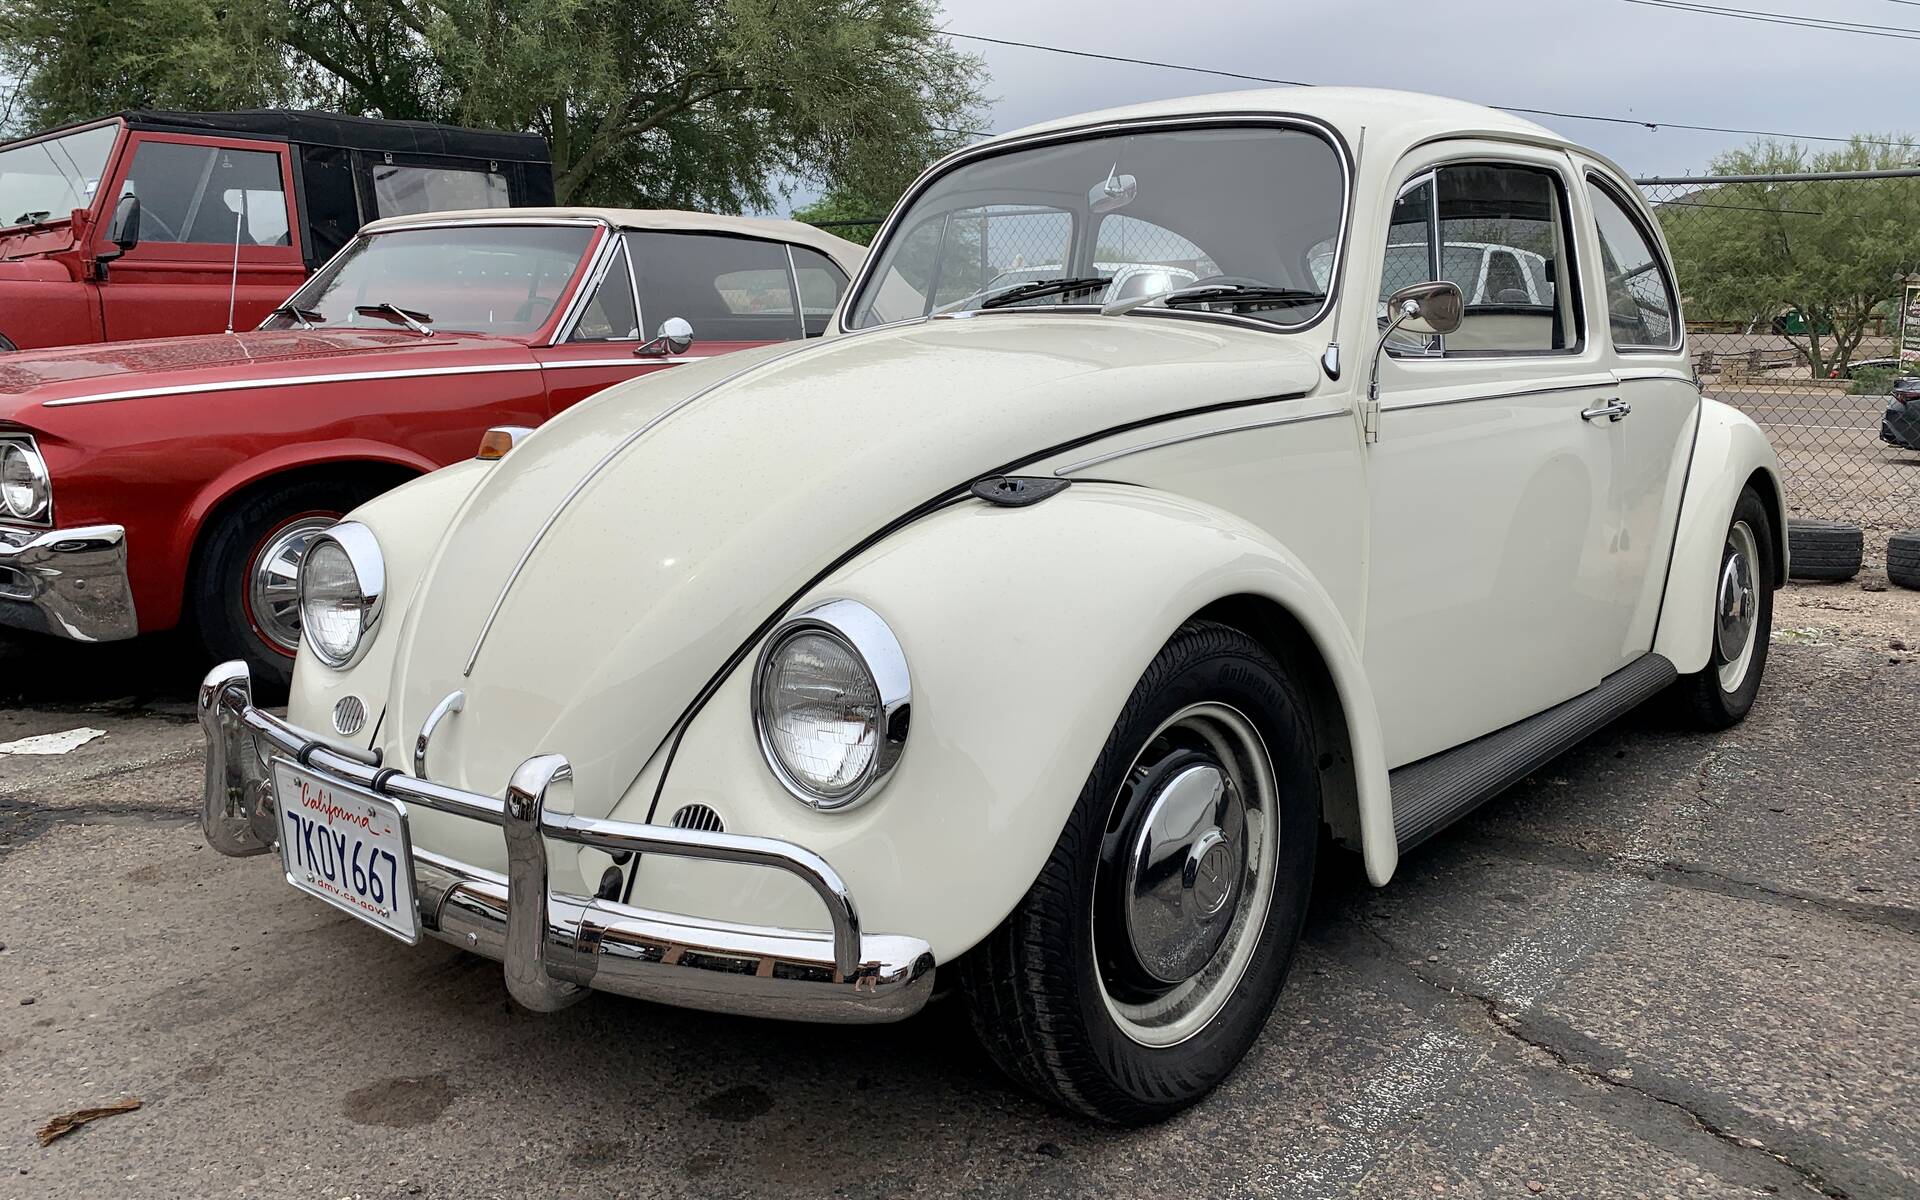 <p><strong>Volkswagen Beetle</strong></p>